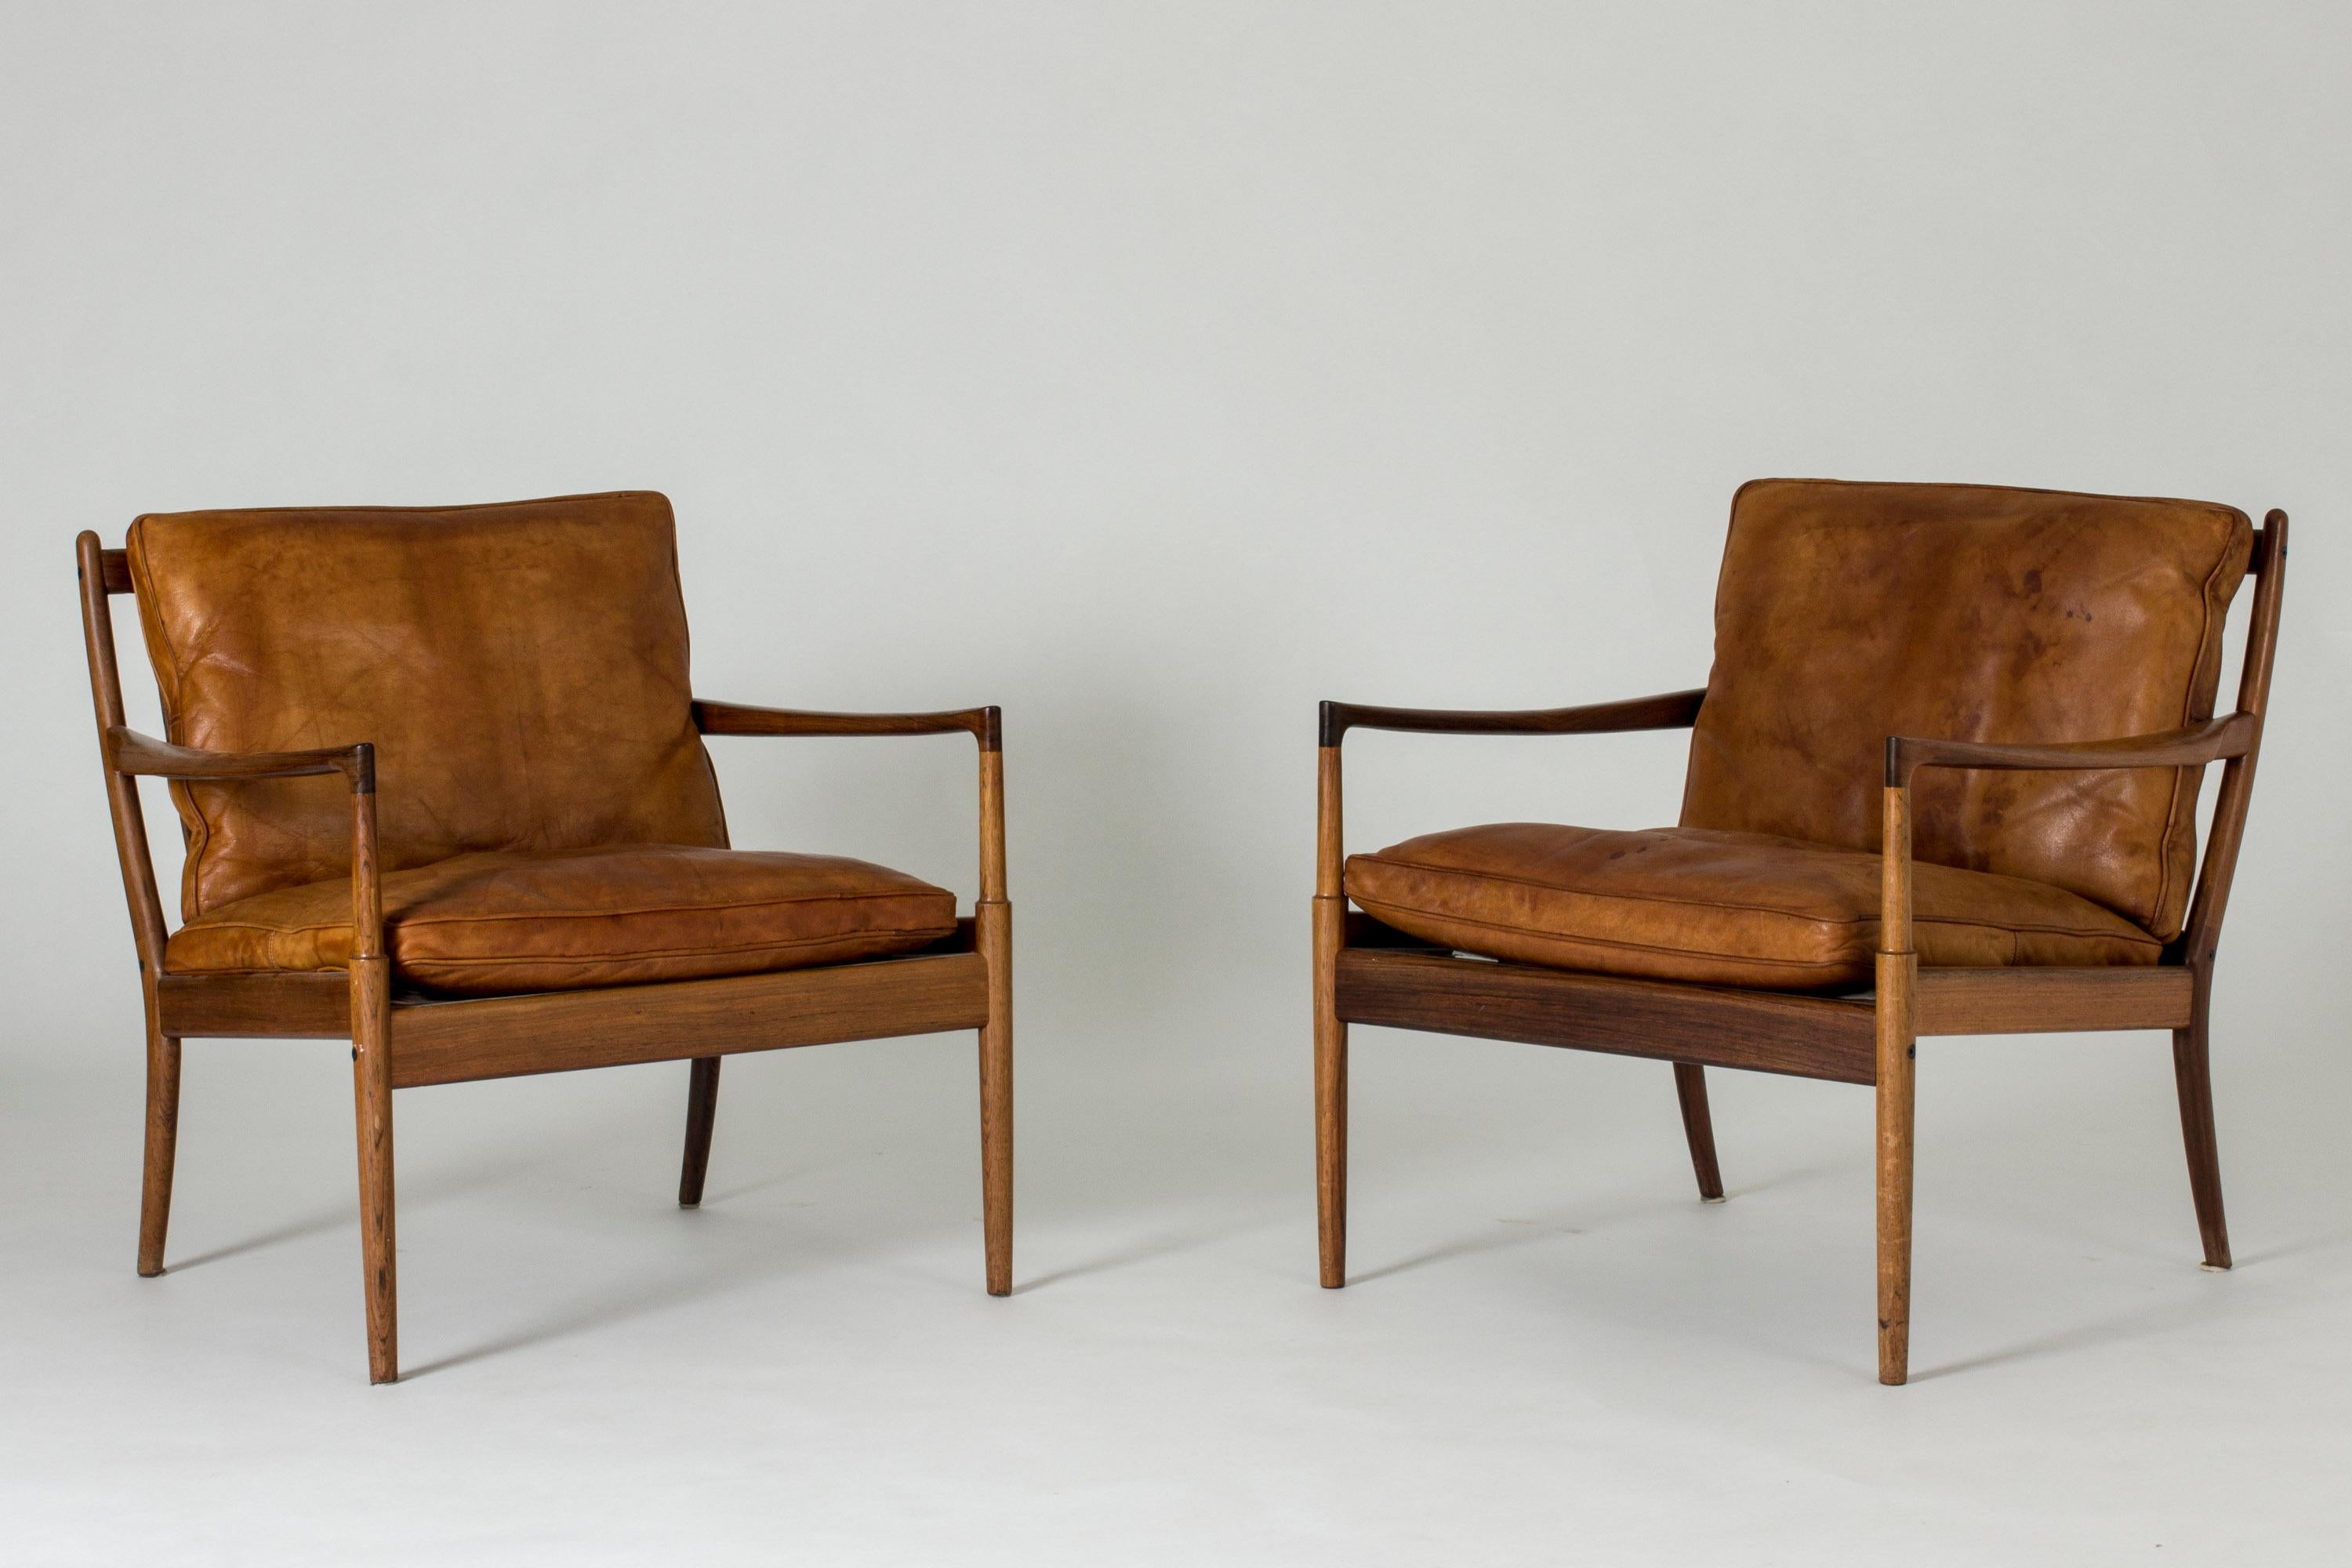 Pair of beautiful “Samsö” lounge chairs by Ib Kofod Larsen, made from rosewood with loose leather backs and seats. Stunning slender armrests in a sculpted design.